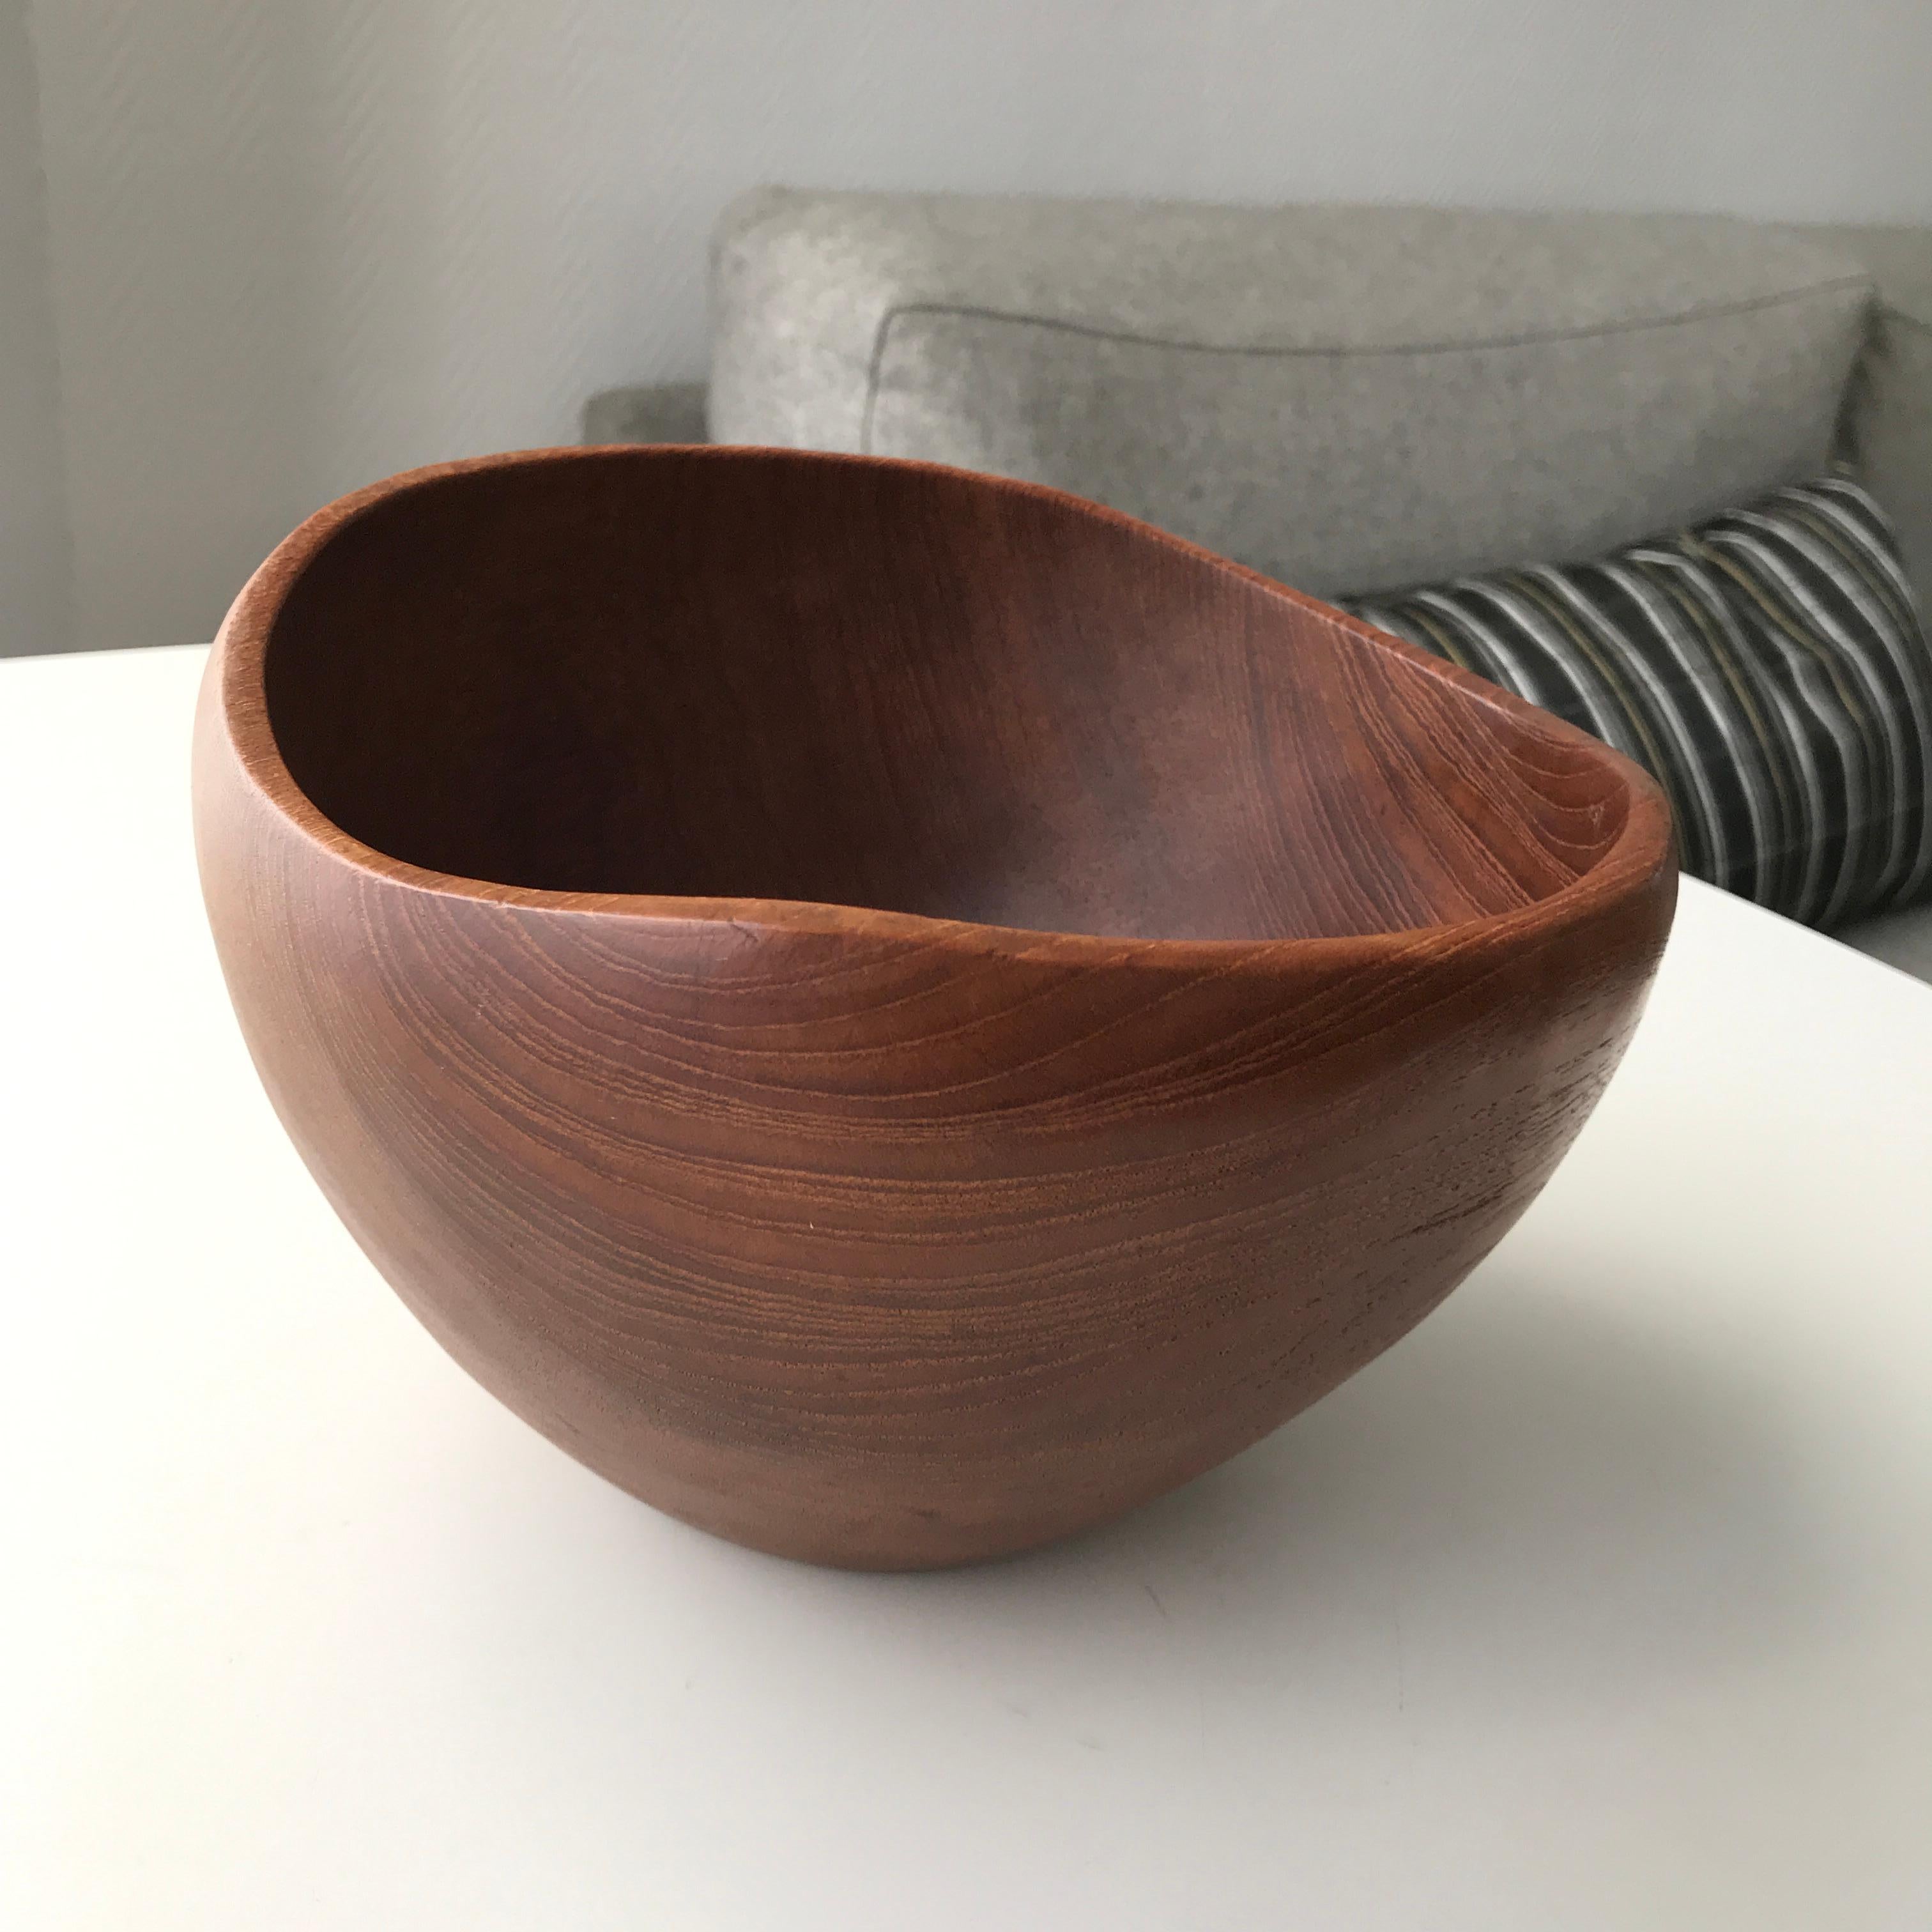 FREE SHIPPING! Mid-Century Teak bowl Danish midcentury in organic design typically for the period of the 1950s-1960s. Hand carved in massive teak wood. Smooth edges and surface. No hallmark or manufacturer signature.